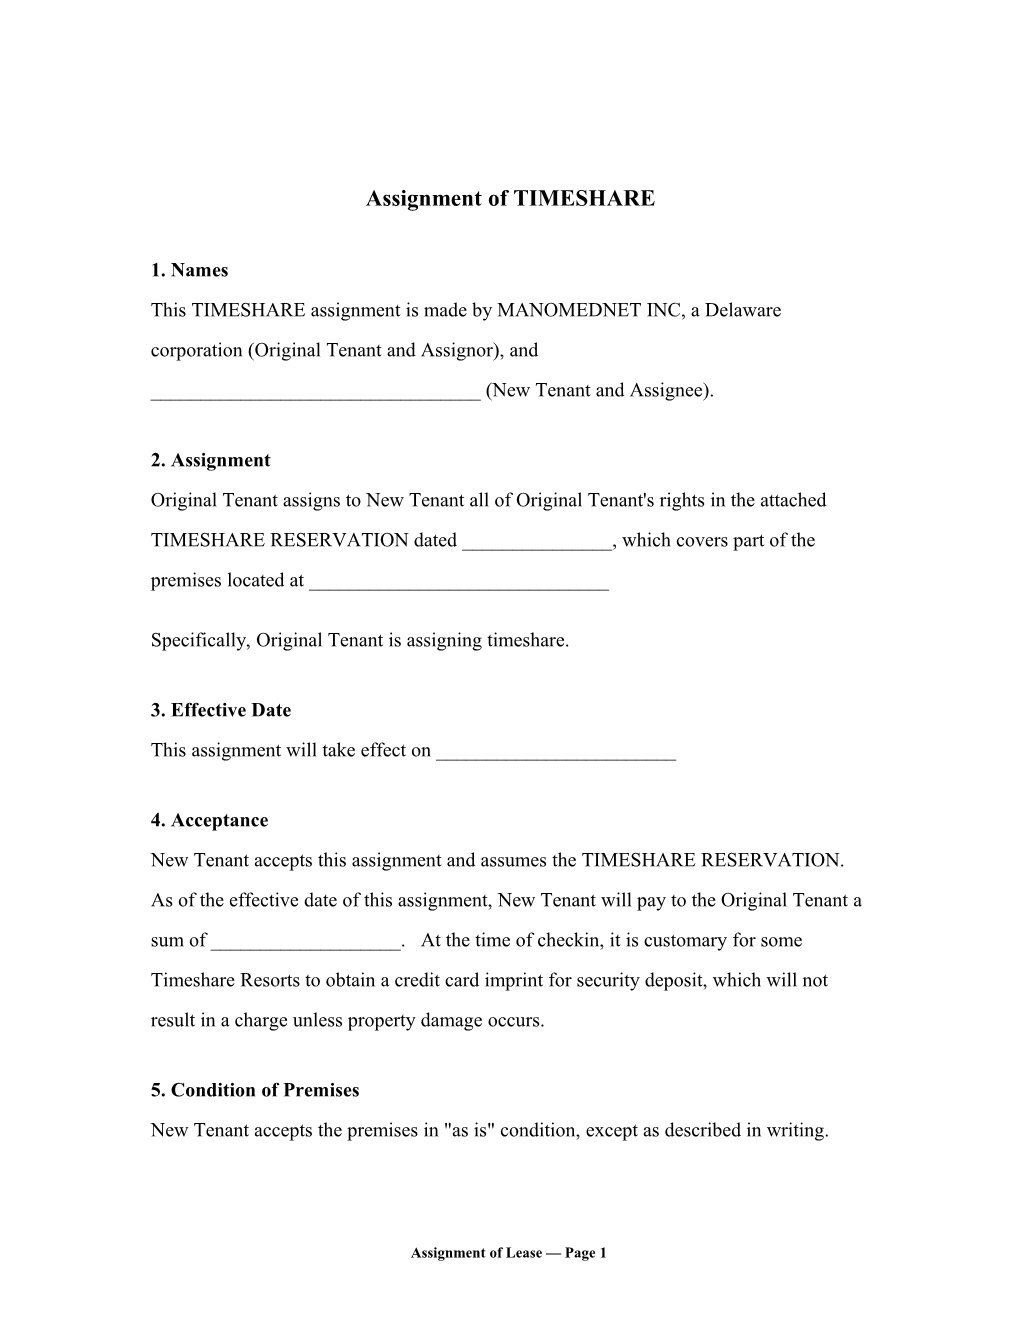 Assignment of TIMESHARE